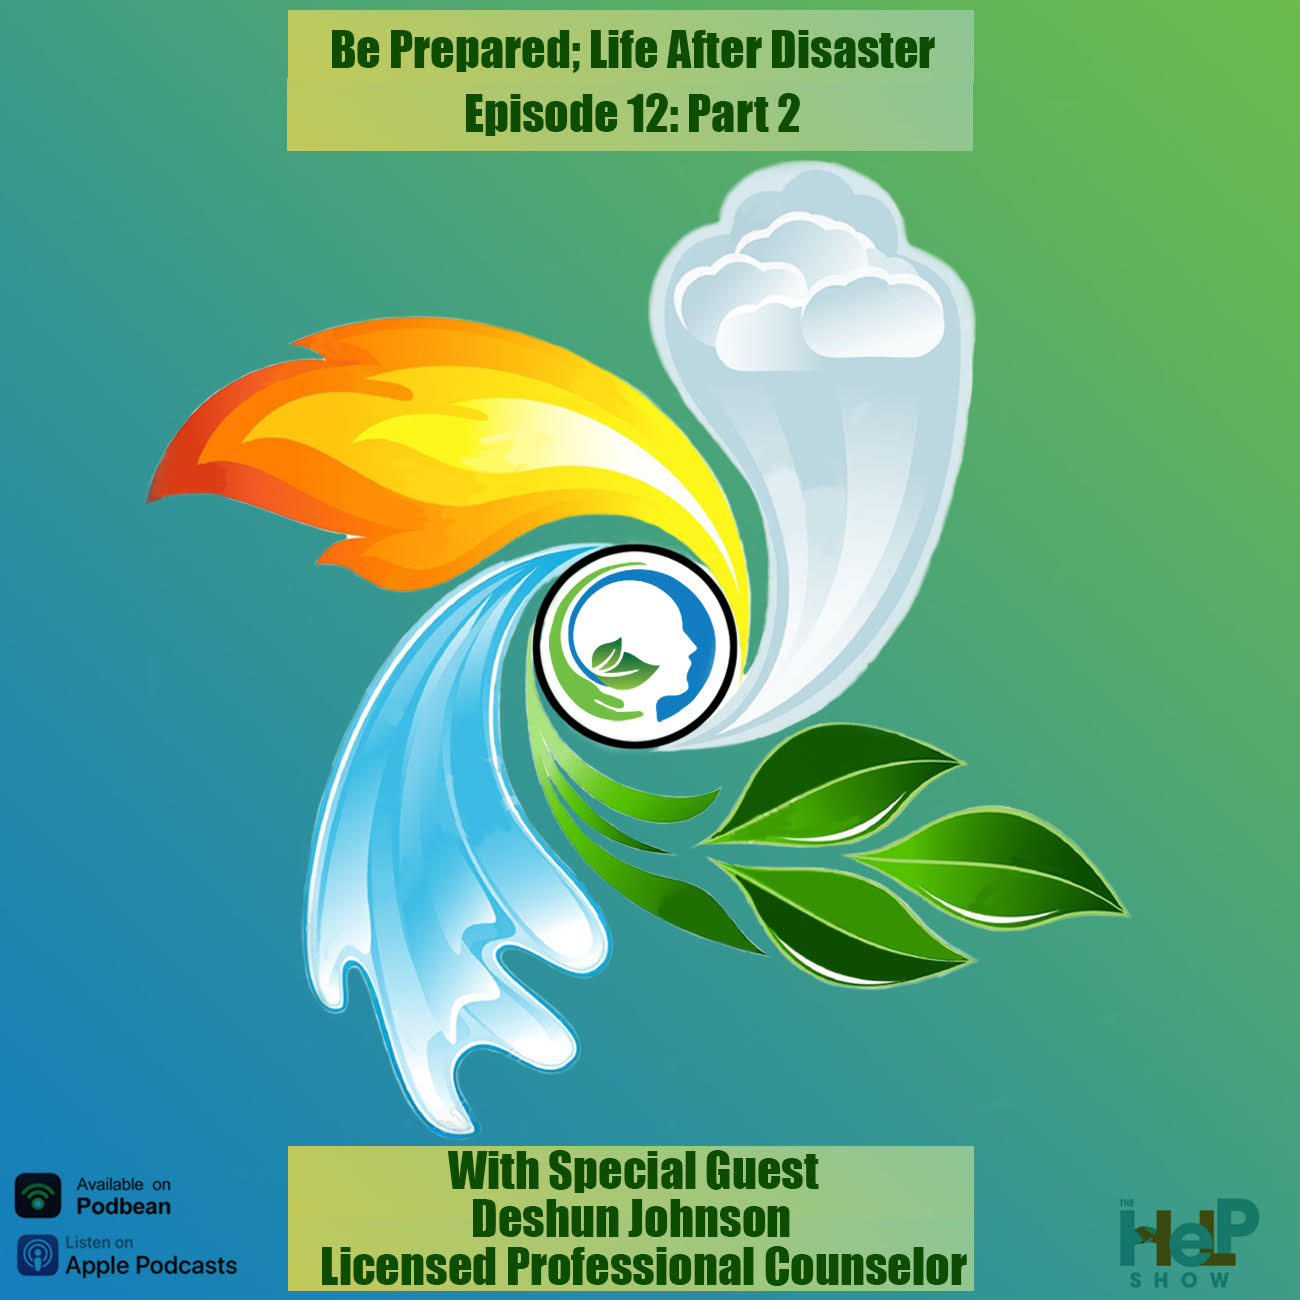 Be Prepared: Life After Disaster Part 2